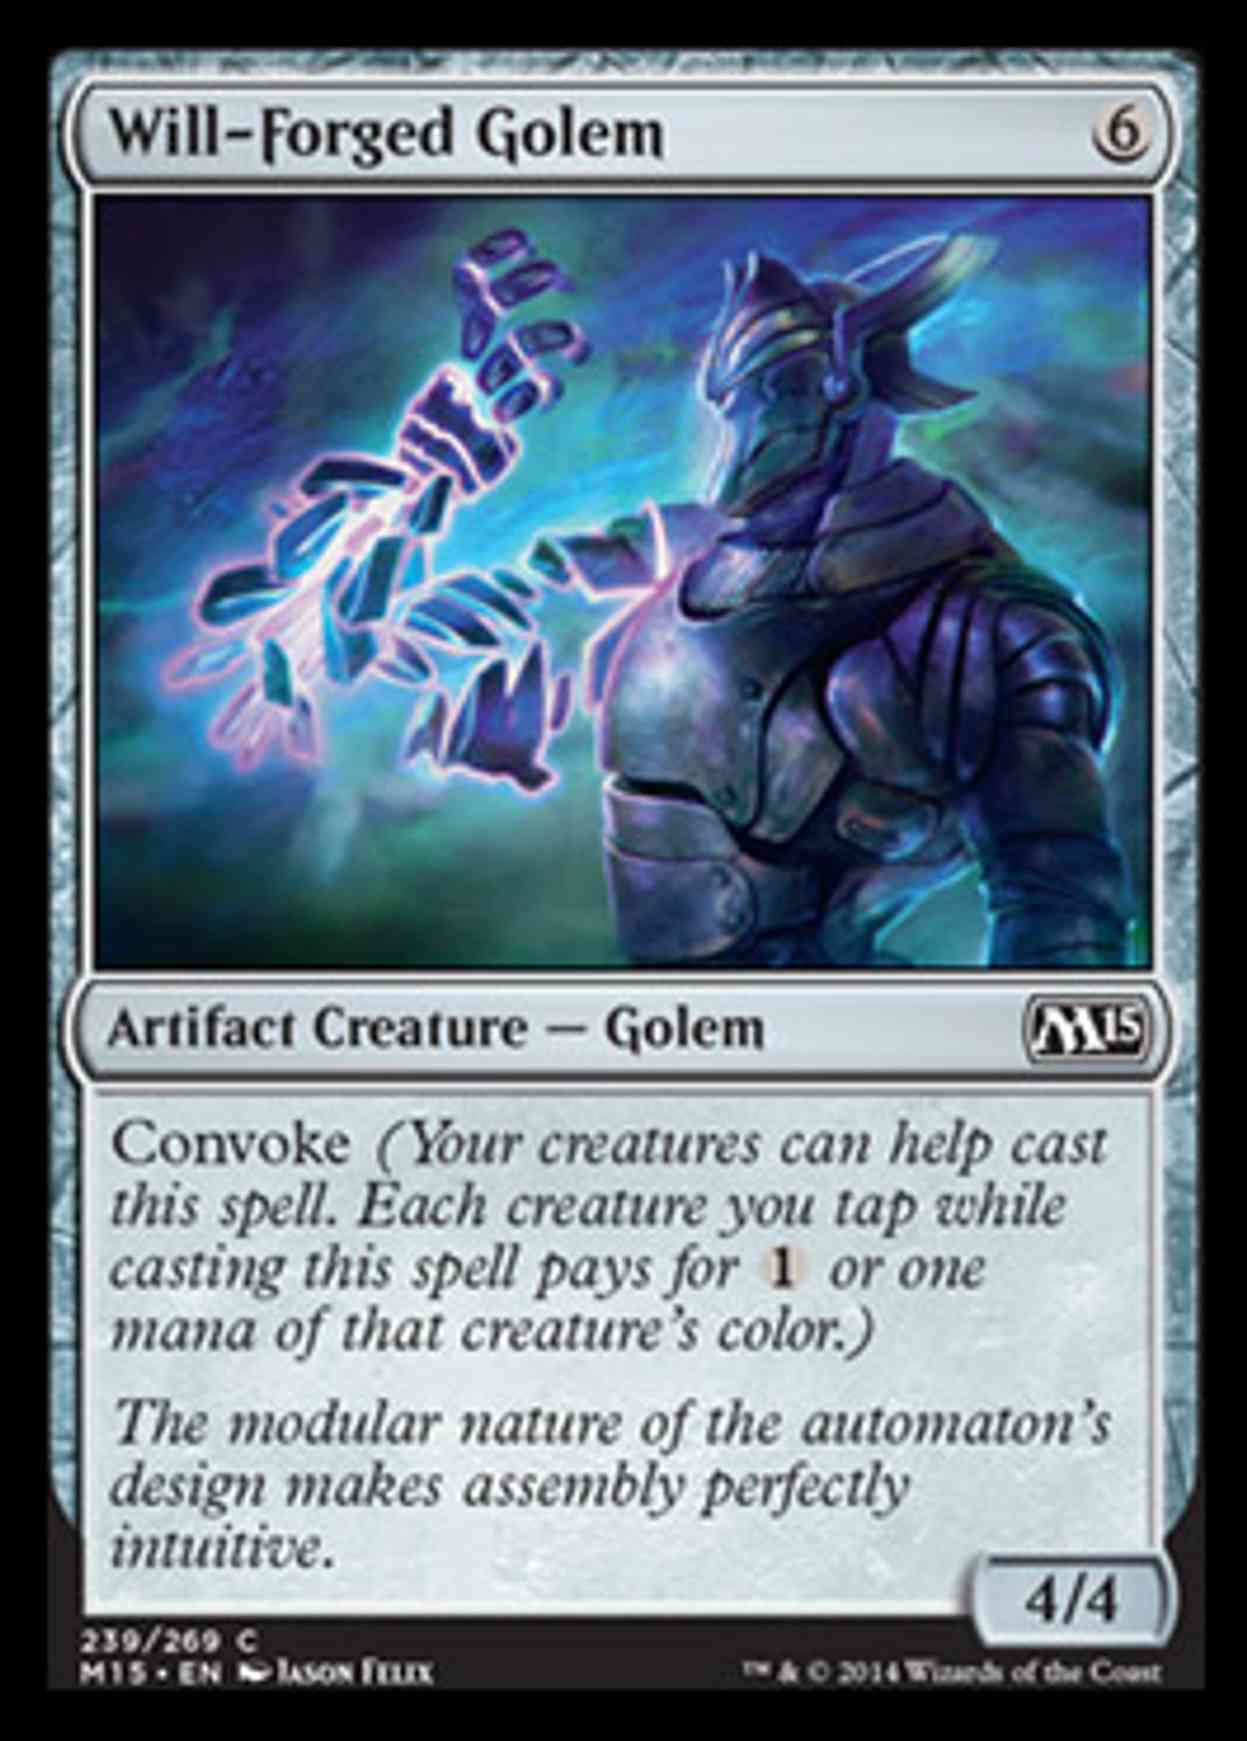 Will-Forged Golem magic card front